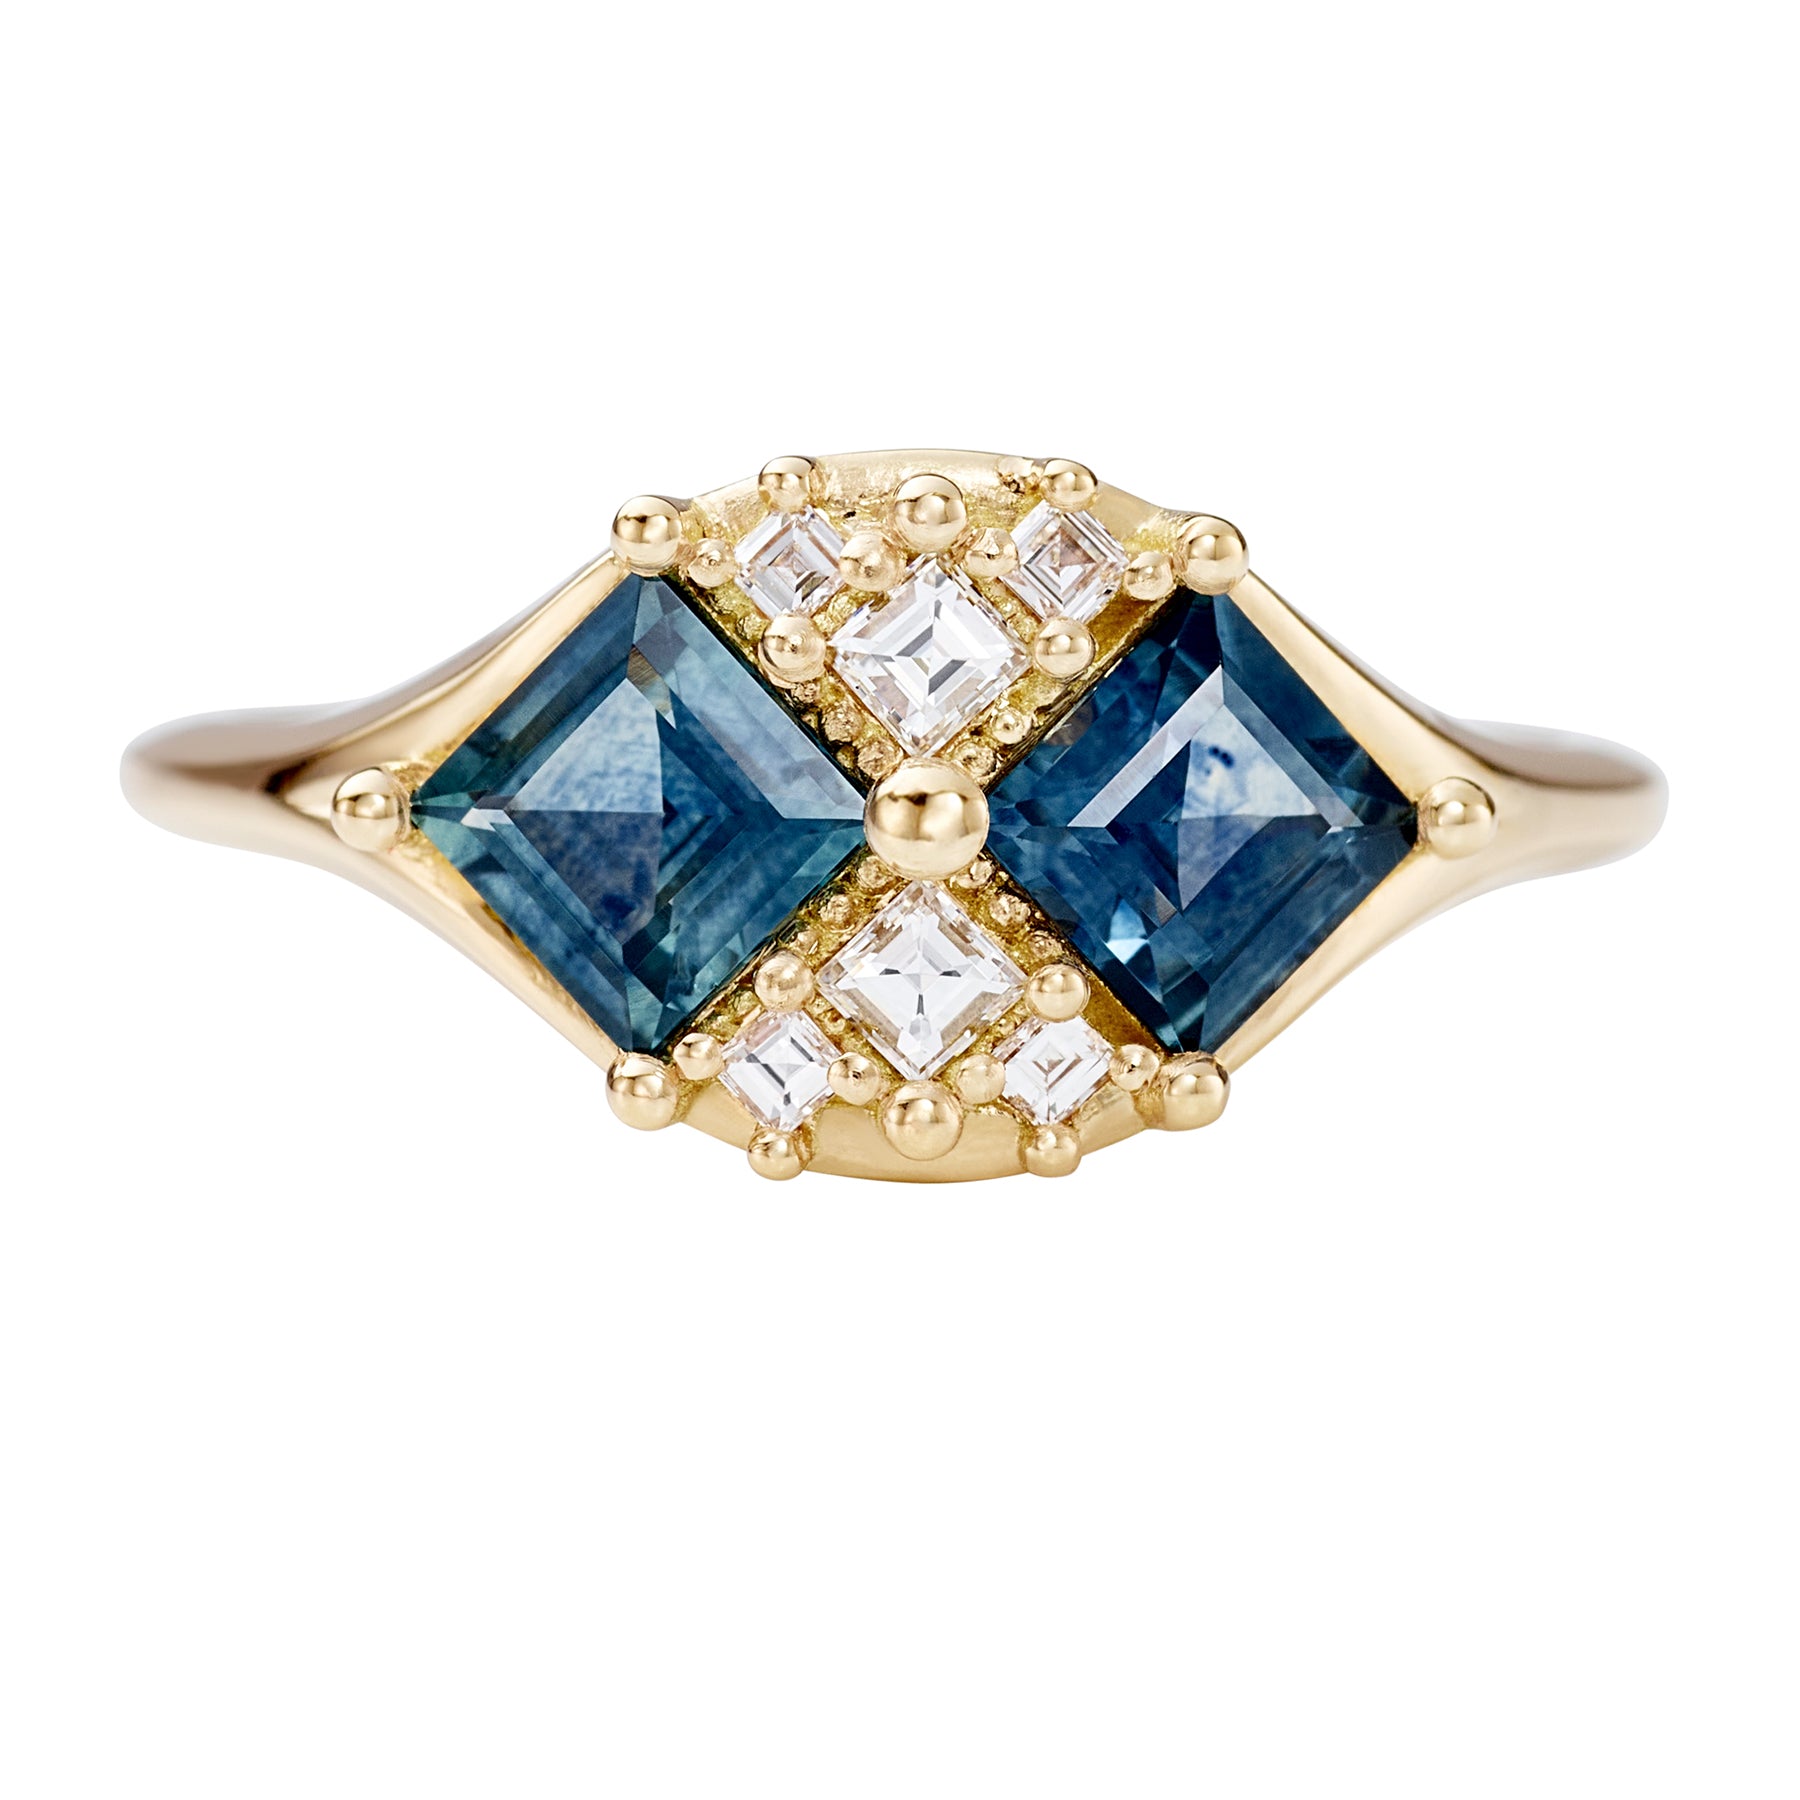 Mirage-Teal-Sapphire-and-Diamond-Carre-Cut-Engagement-Ring-CLOSEUP